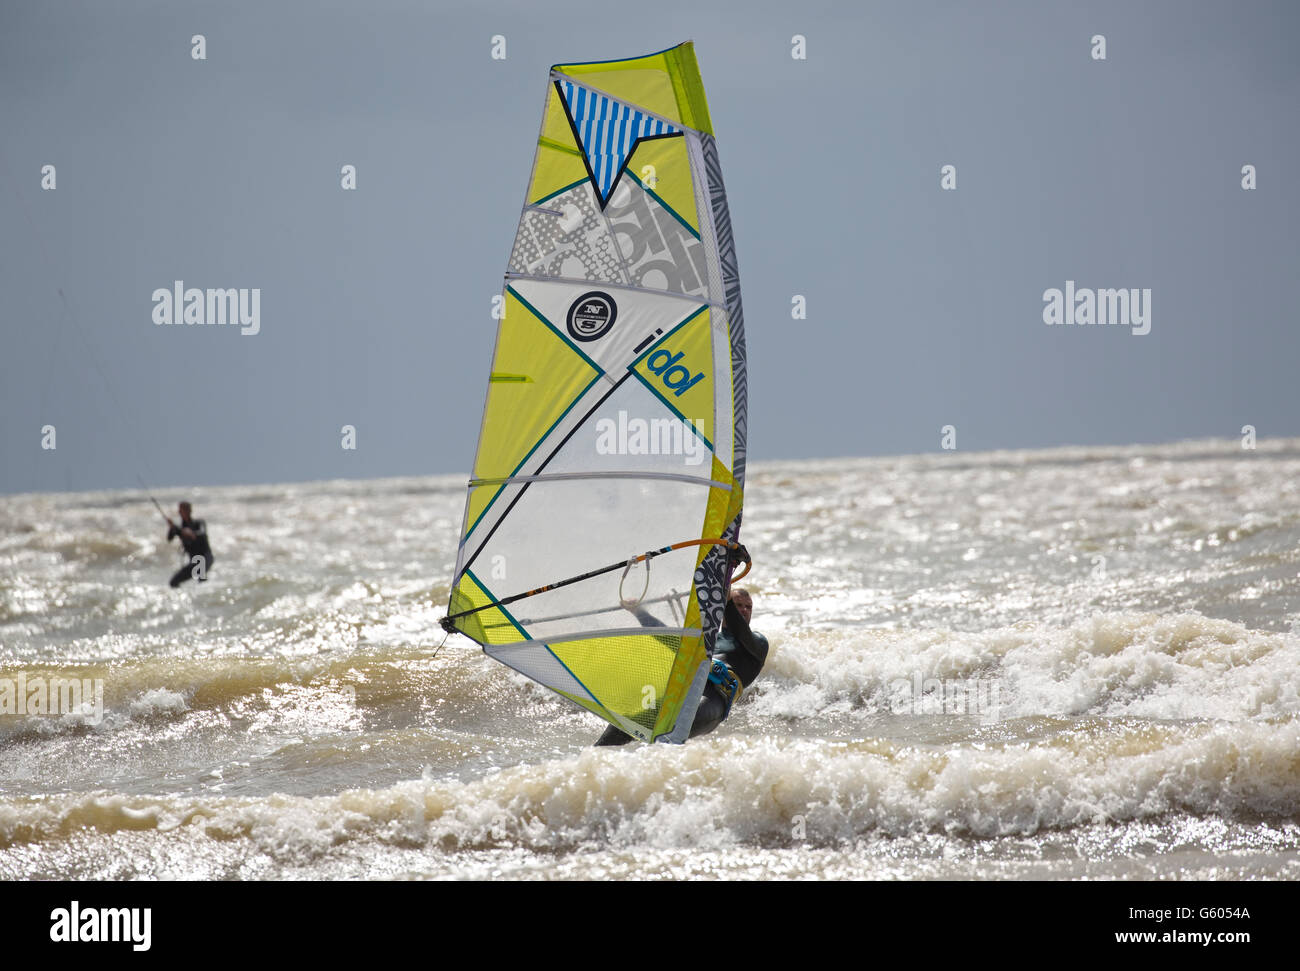 Windsurfer sailing surfing in rough sea Saint-Brevin-les-Pins France Stock Photo